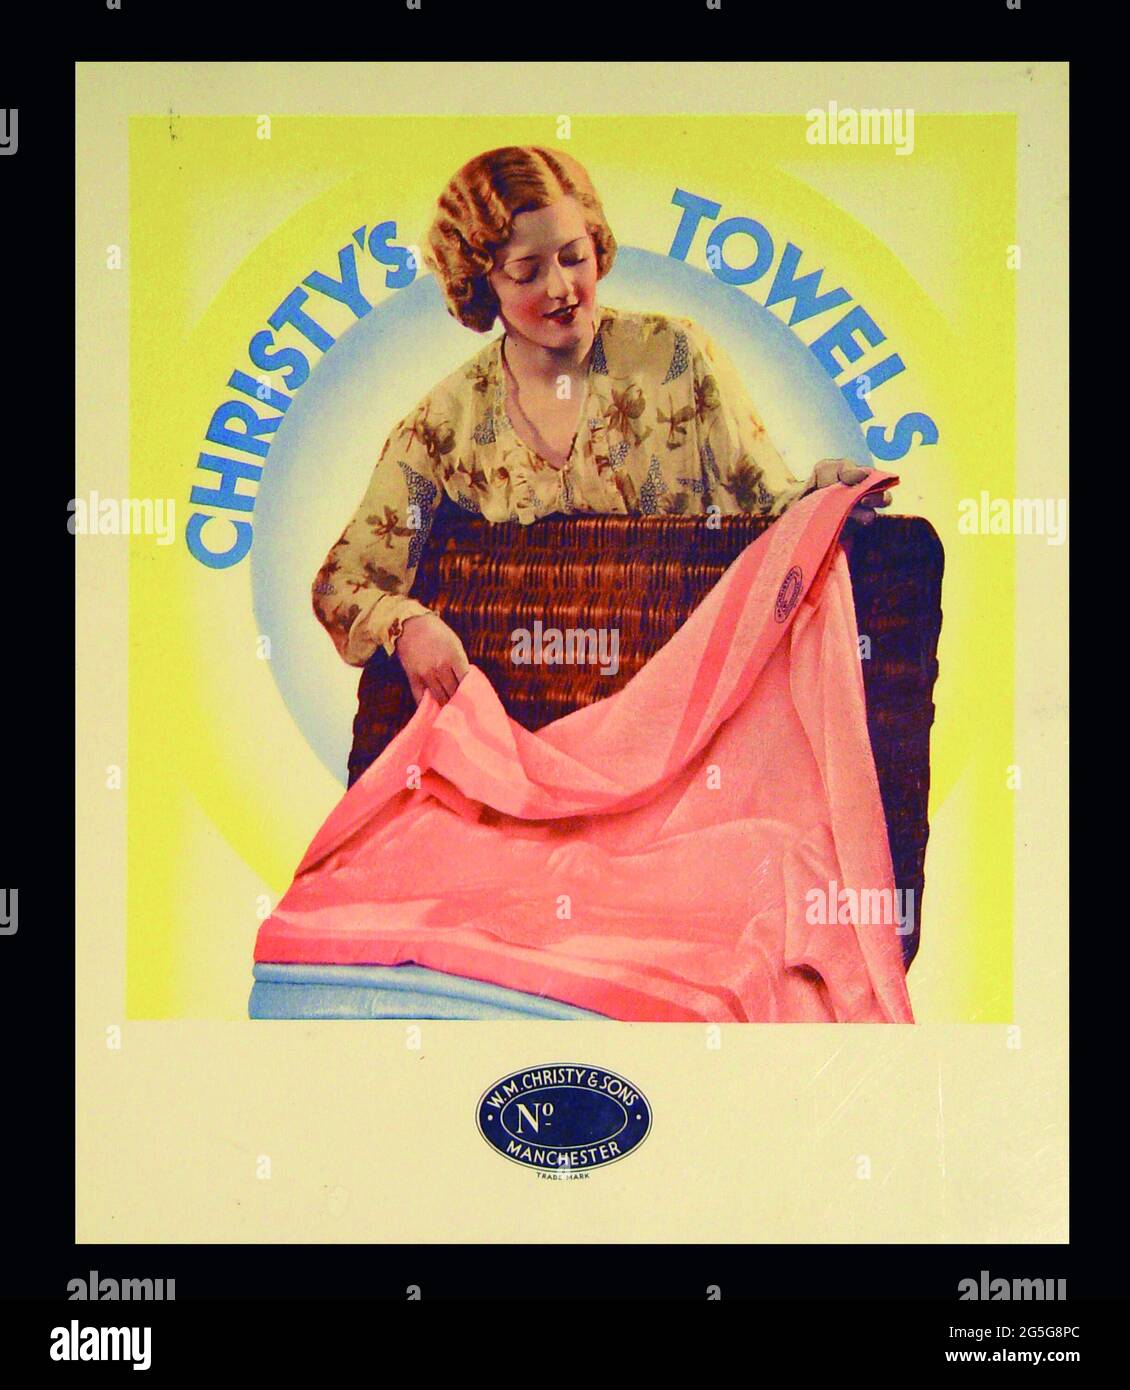 https://c8.alamy.com/comp/2G5G8PC/christy-towels-drapery-store-display-card-advert-1930s-thirties-art-deco-design-advertising-pretty-girl-with-thirties-permanent-wave-wicker-basket-pink-towel-manchester-2G5G8PC.jpg